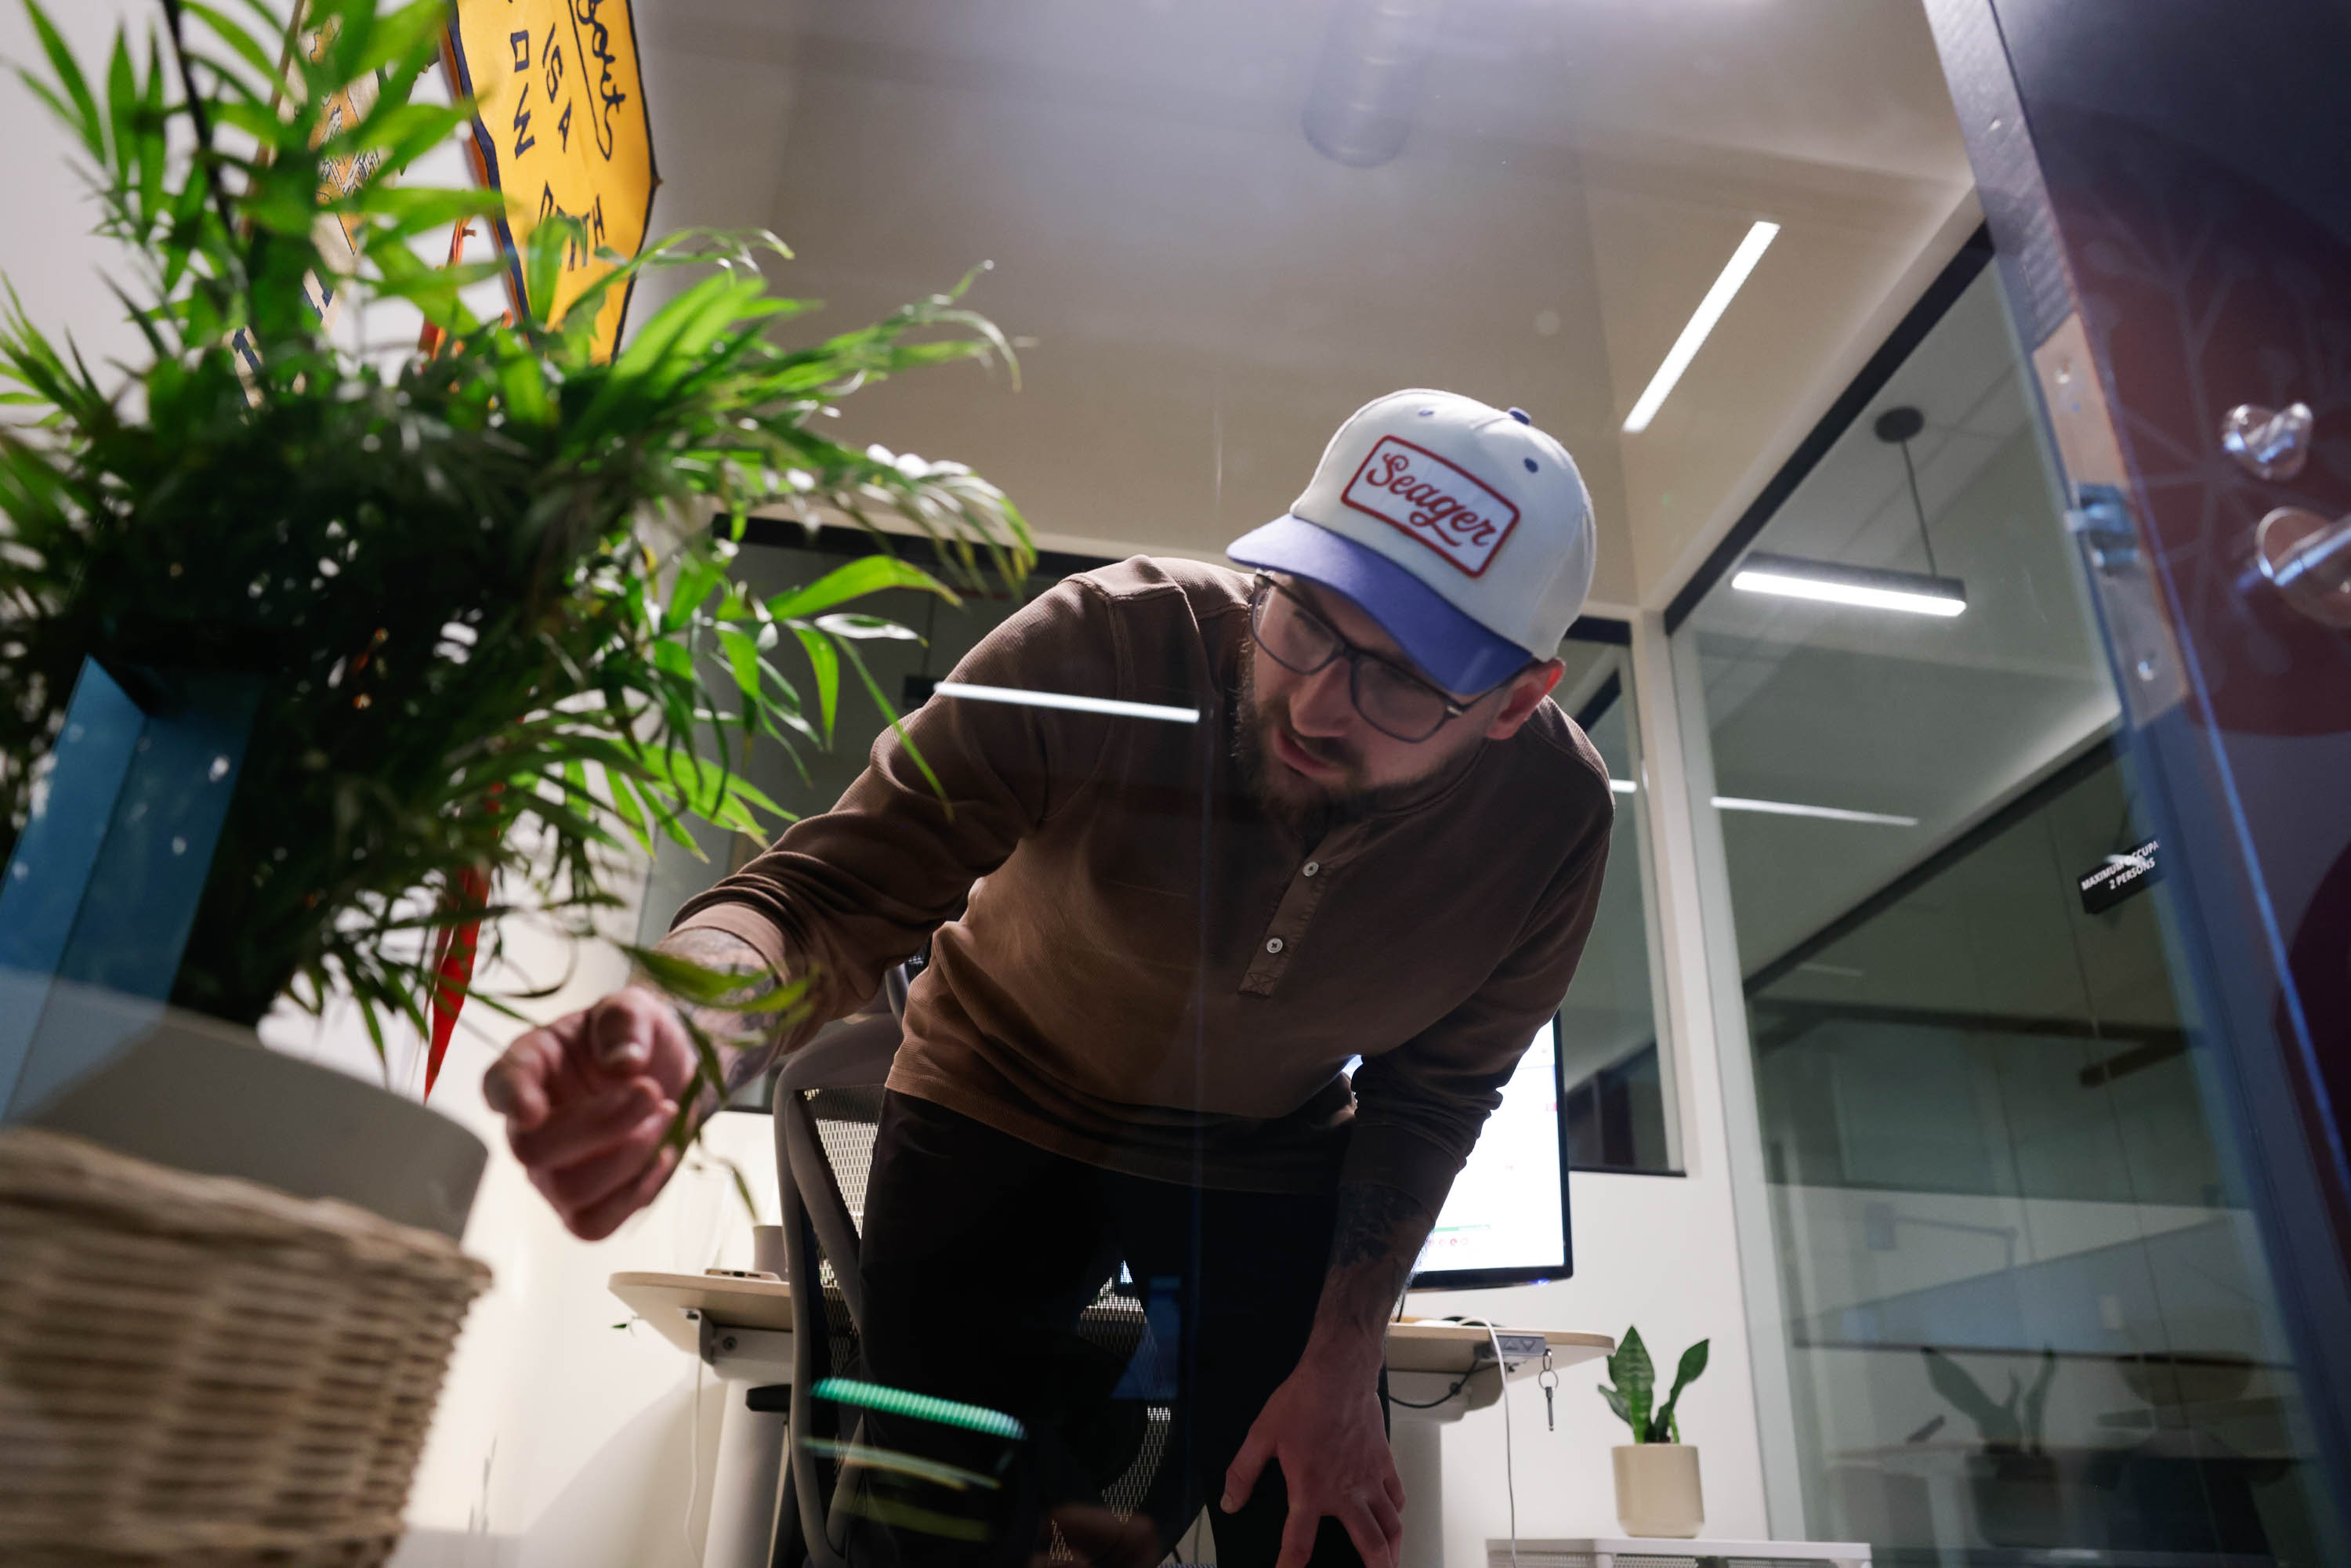 A man in a cap leans over a chair in an office, with plants and a glass door nearby.